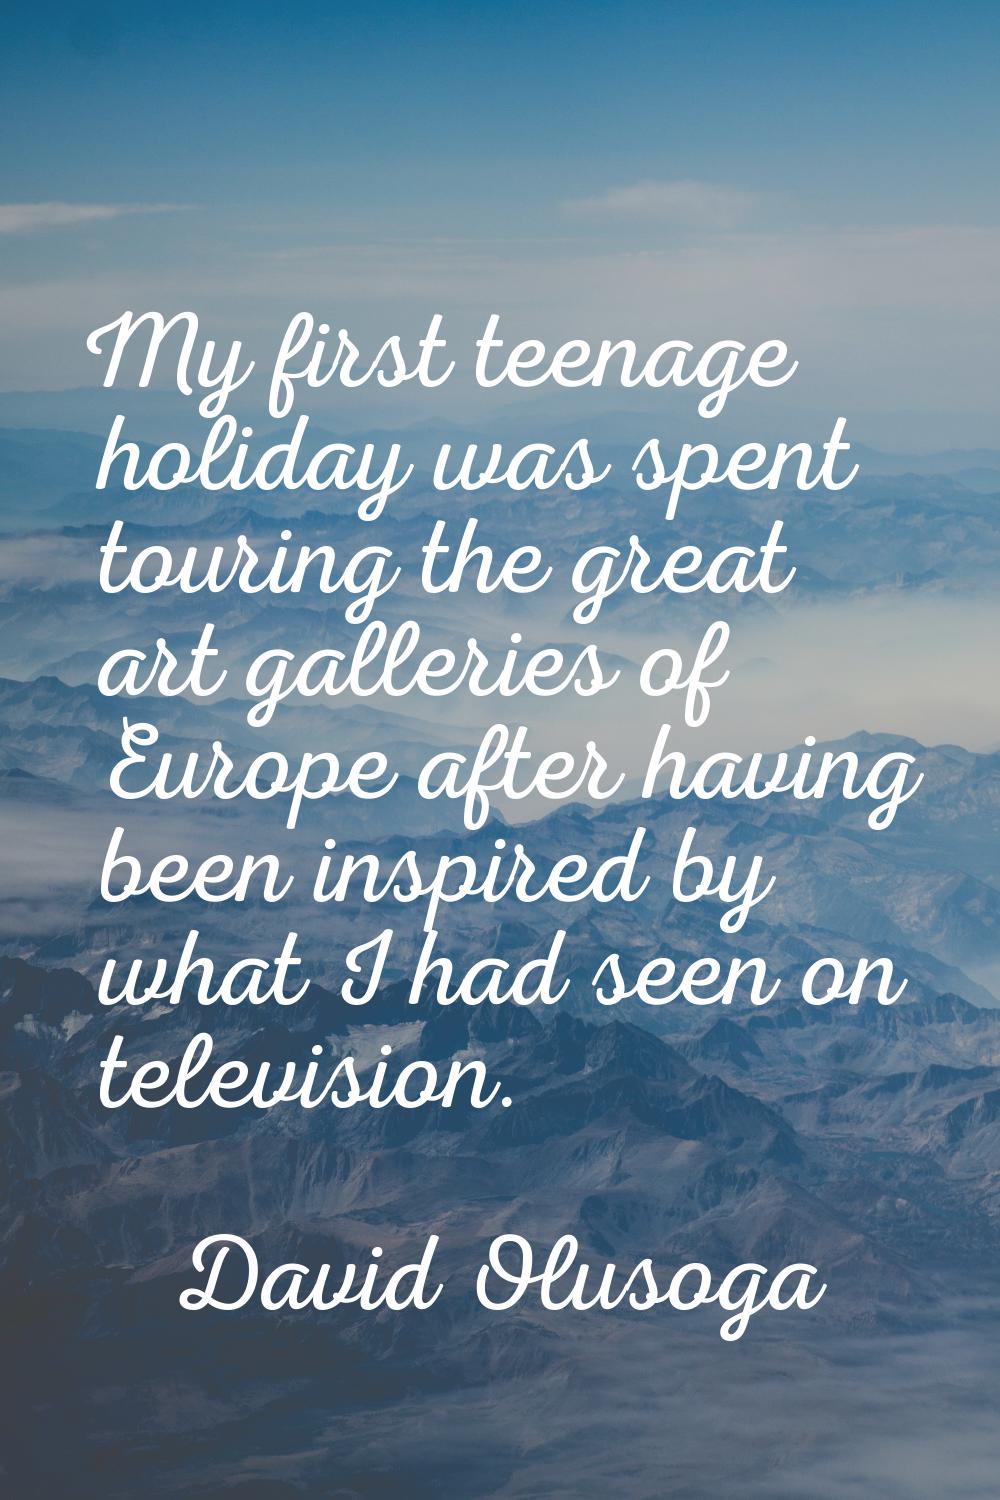 My first teenage holiday was spent touring the great art galleries of Europe after having been insp